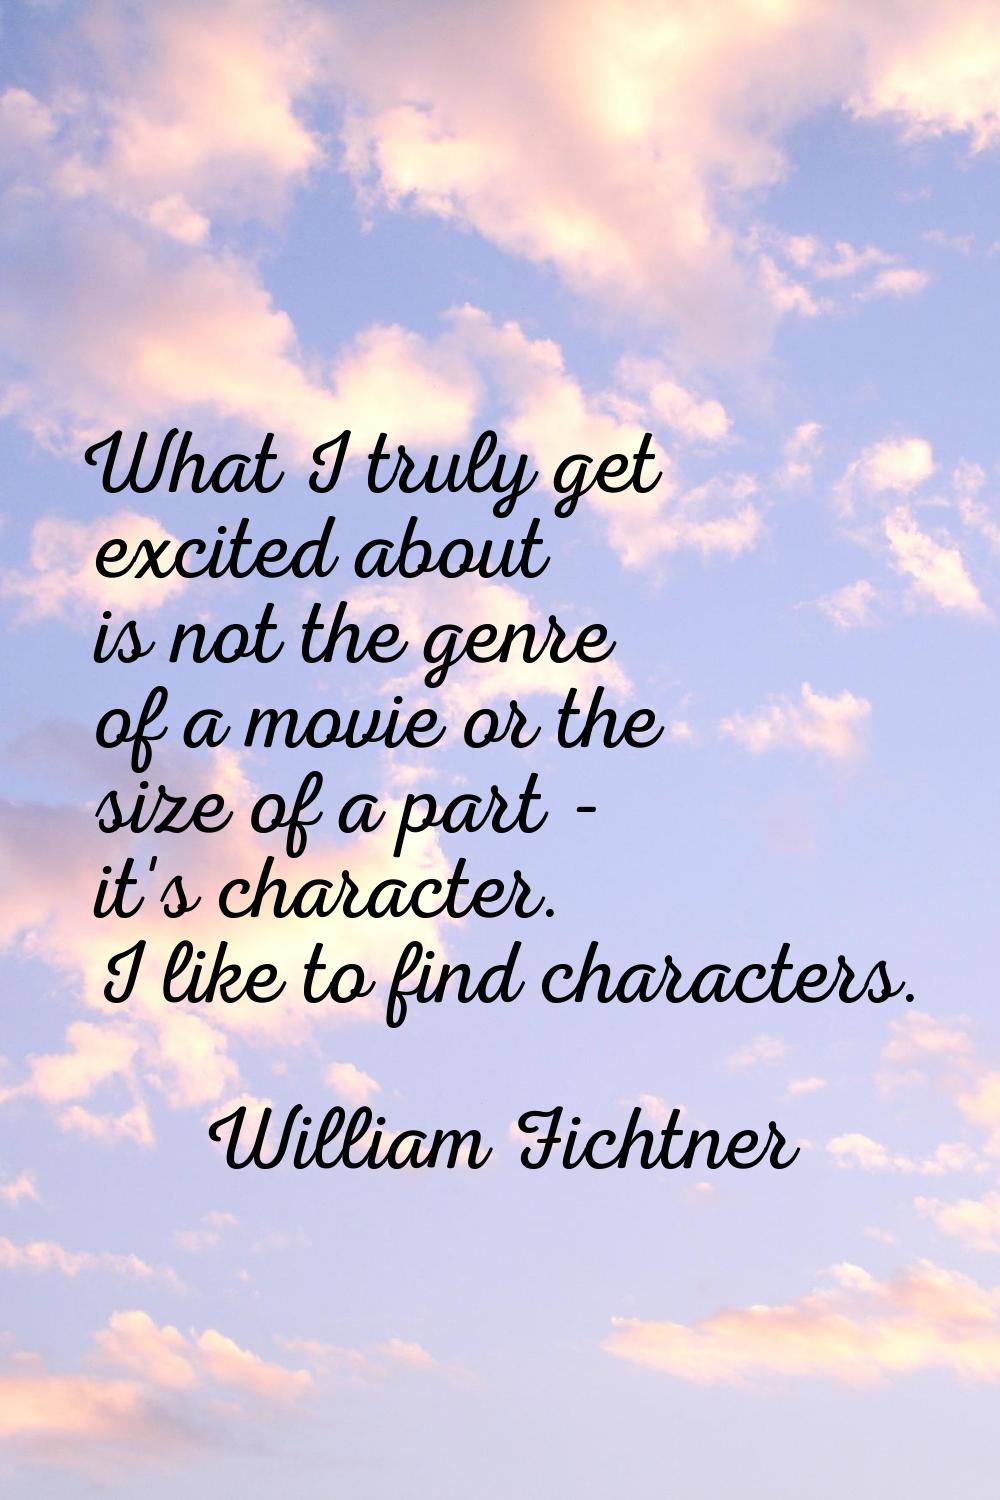 What I truly get excited about is not the genre of a movie or the size of a part - it's character. 